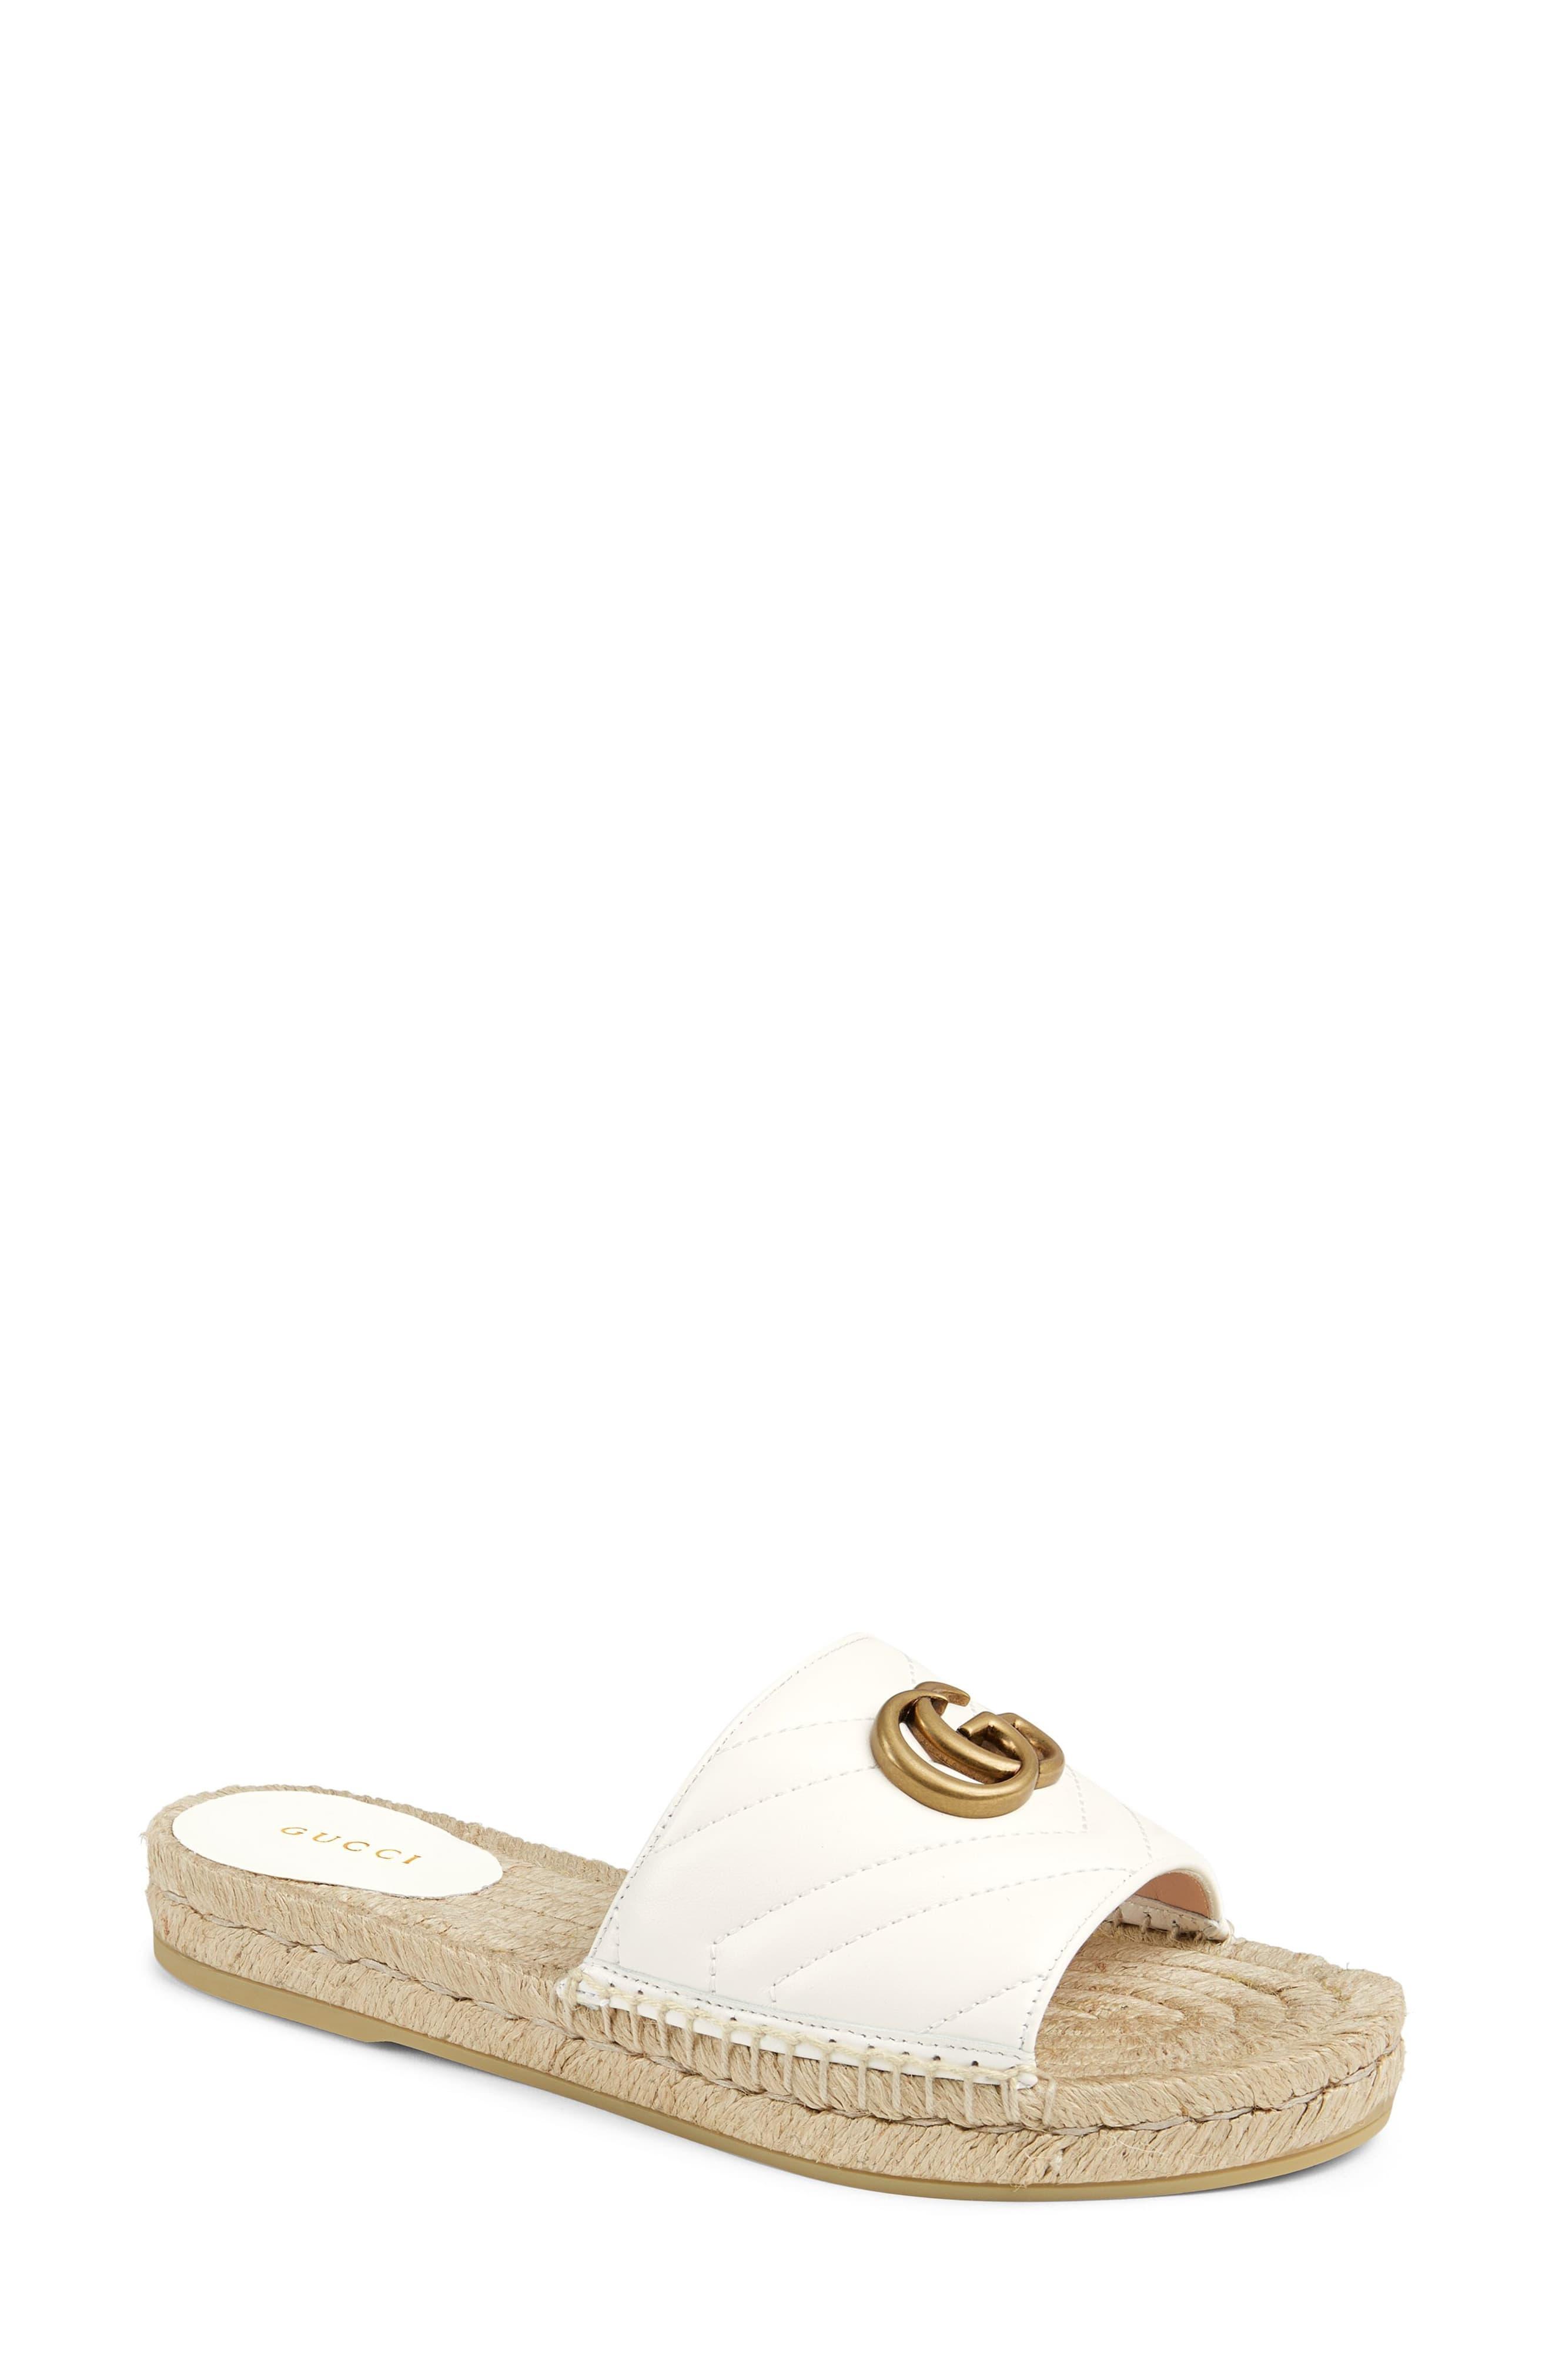 Gucci Pilar Flatform Leather Sandals in White - Save 32% - Lyst